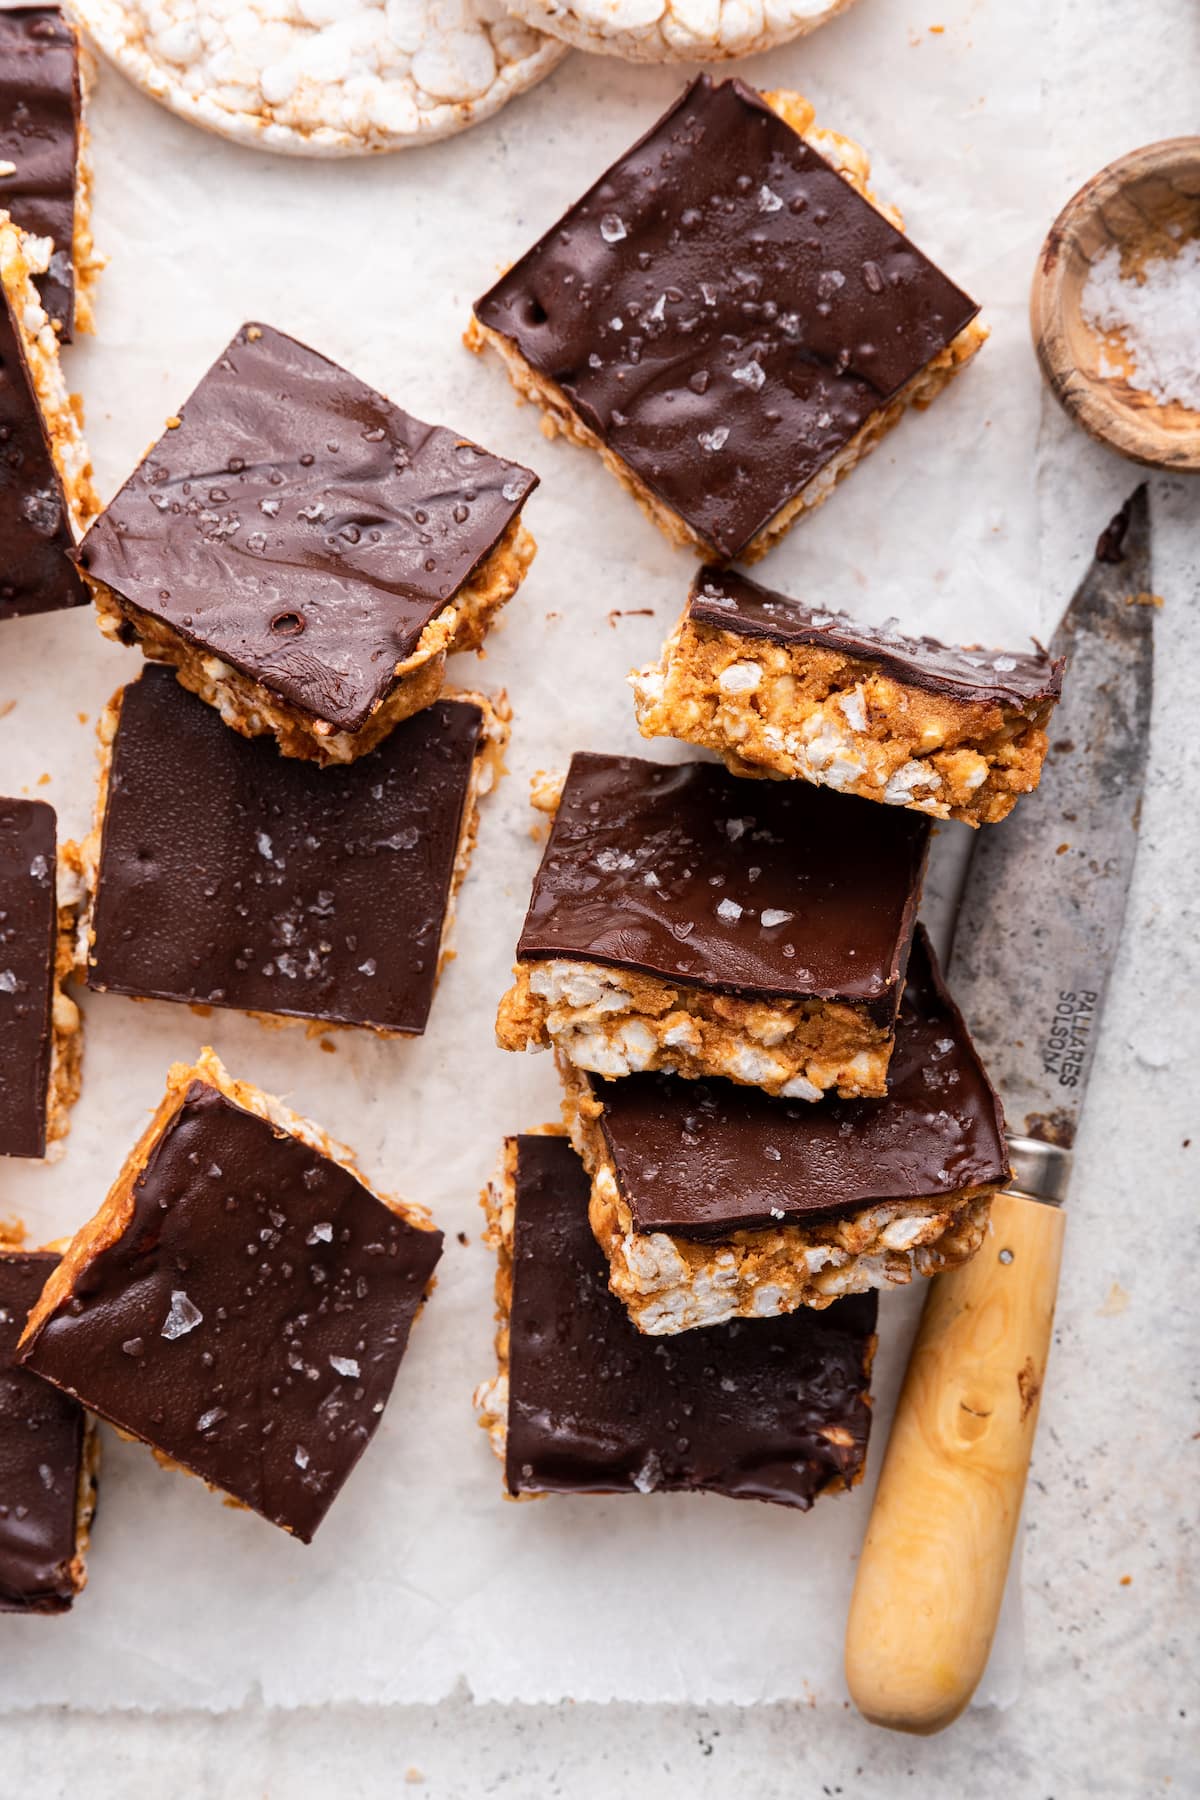 Multiple no bake peanut butter crunch bars on parchment paper near a knife.